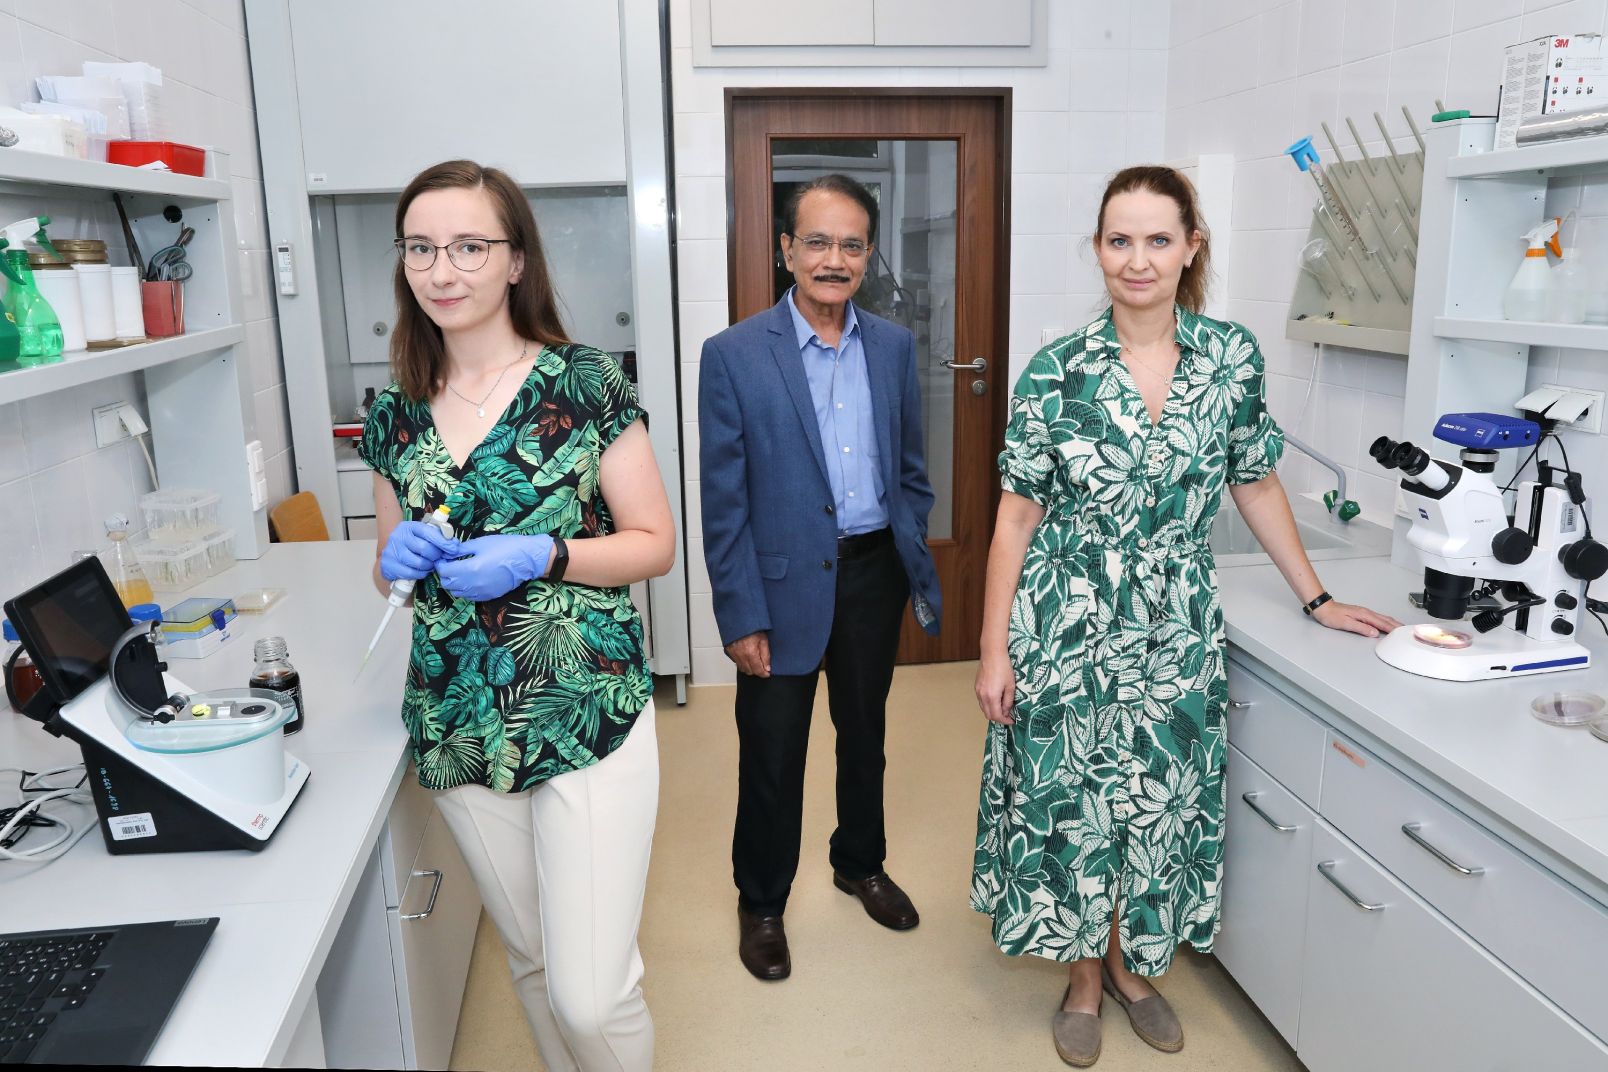 Prof. Golińska and prof. Rai together with a member of the nanobiotechnology team, Joanna Trzcińska-Wencel, PhD student of AST doctoral school at NCU